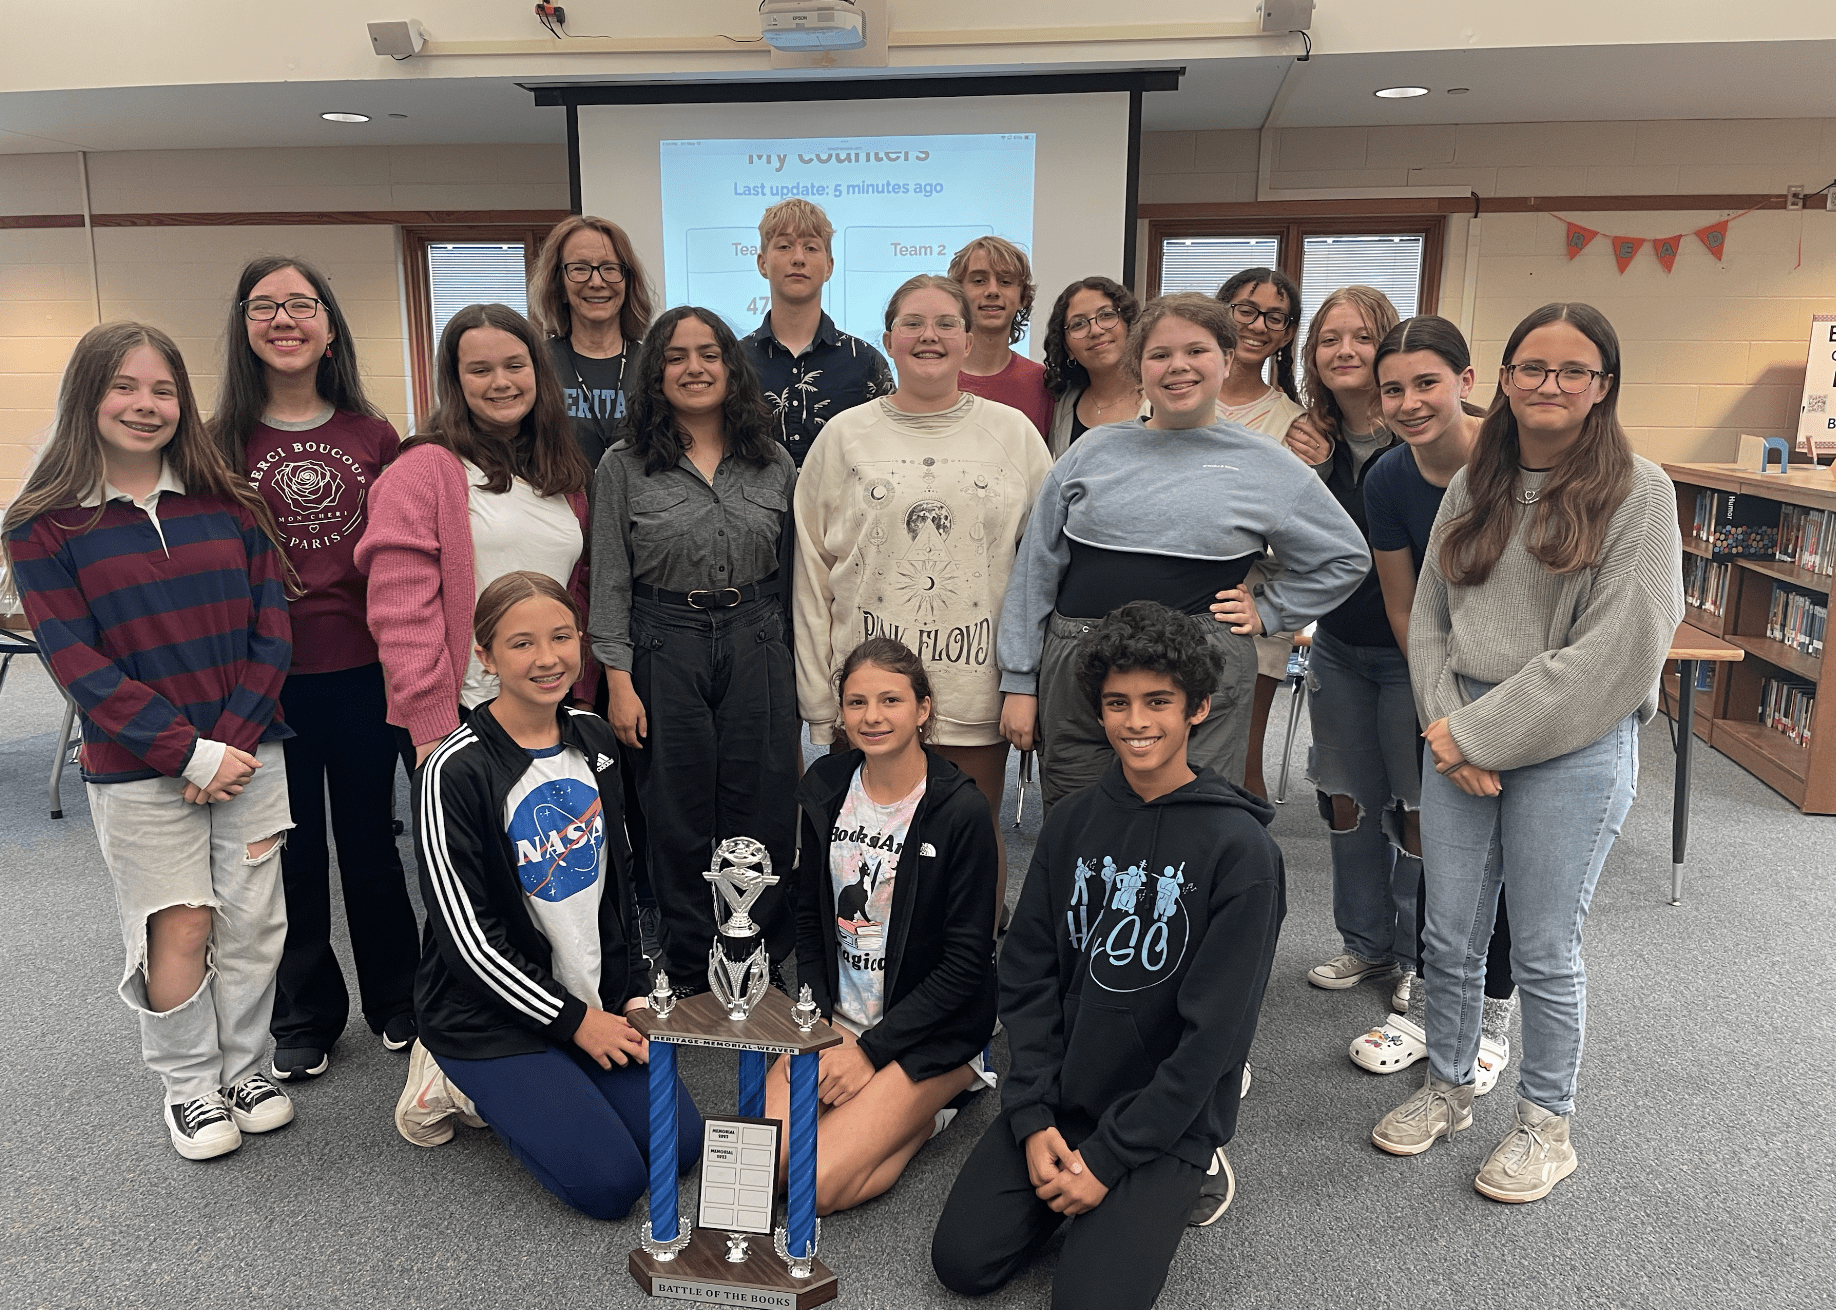 Heritage Middle School Claims Victory in Battle of the Books